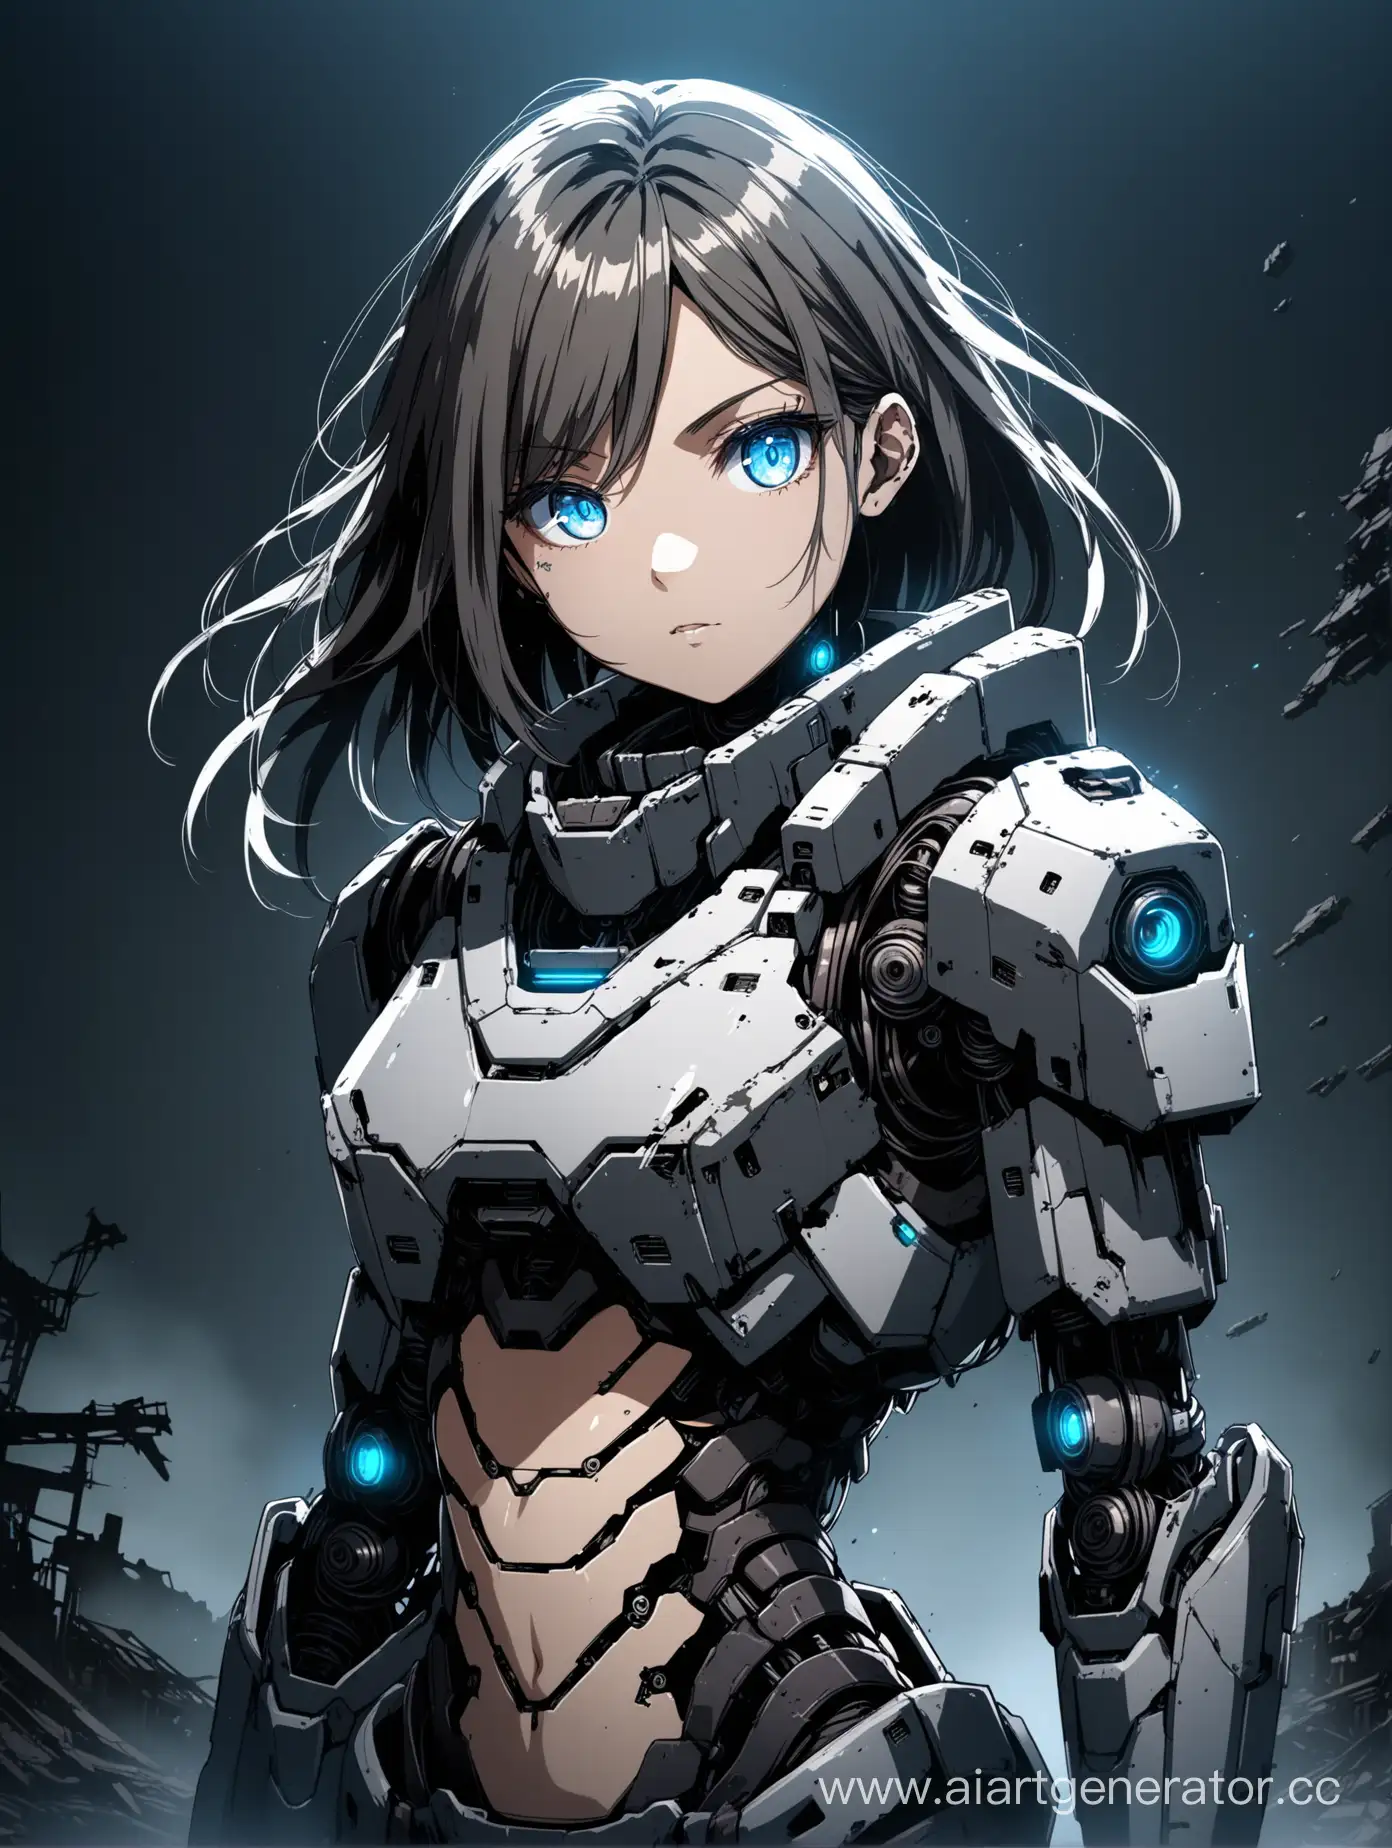 PostApocalyptic-Robot-Girl-with-Bright-Blue-Eyes-in-Anime-Style